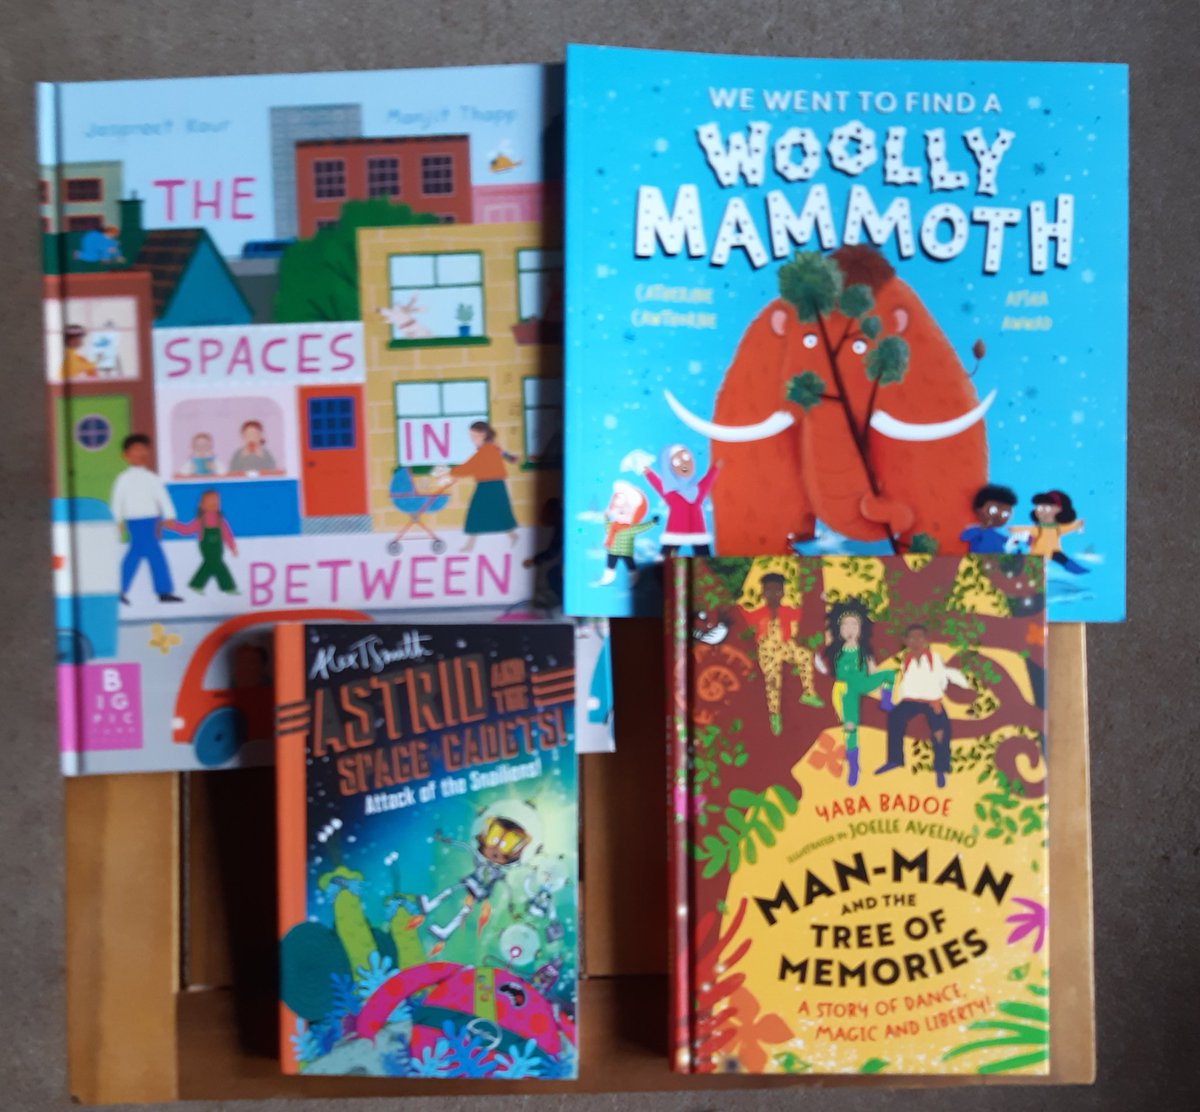 When you're feeling low, visit a bookshop. Thanks @talesonmoonlane for a great selection to brighten my day. Books by @Alex_T_Smith @yaba_badoe and @joelle_avelino @CatCawthorne and Aysha Awwad @behindthenetra and @manjitthapp 📚🌞